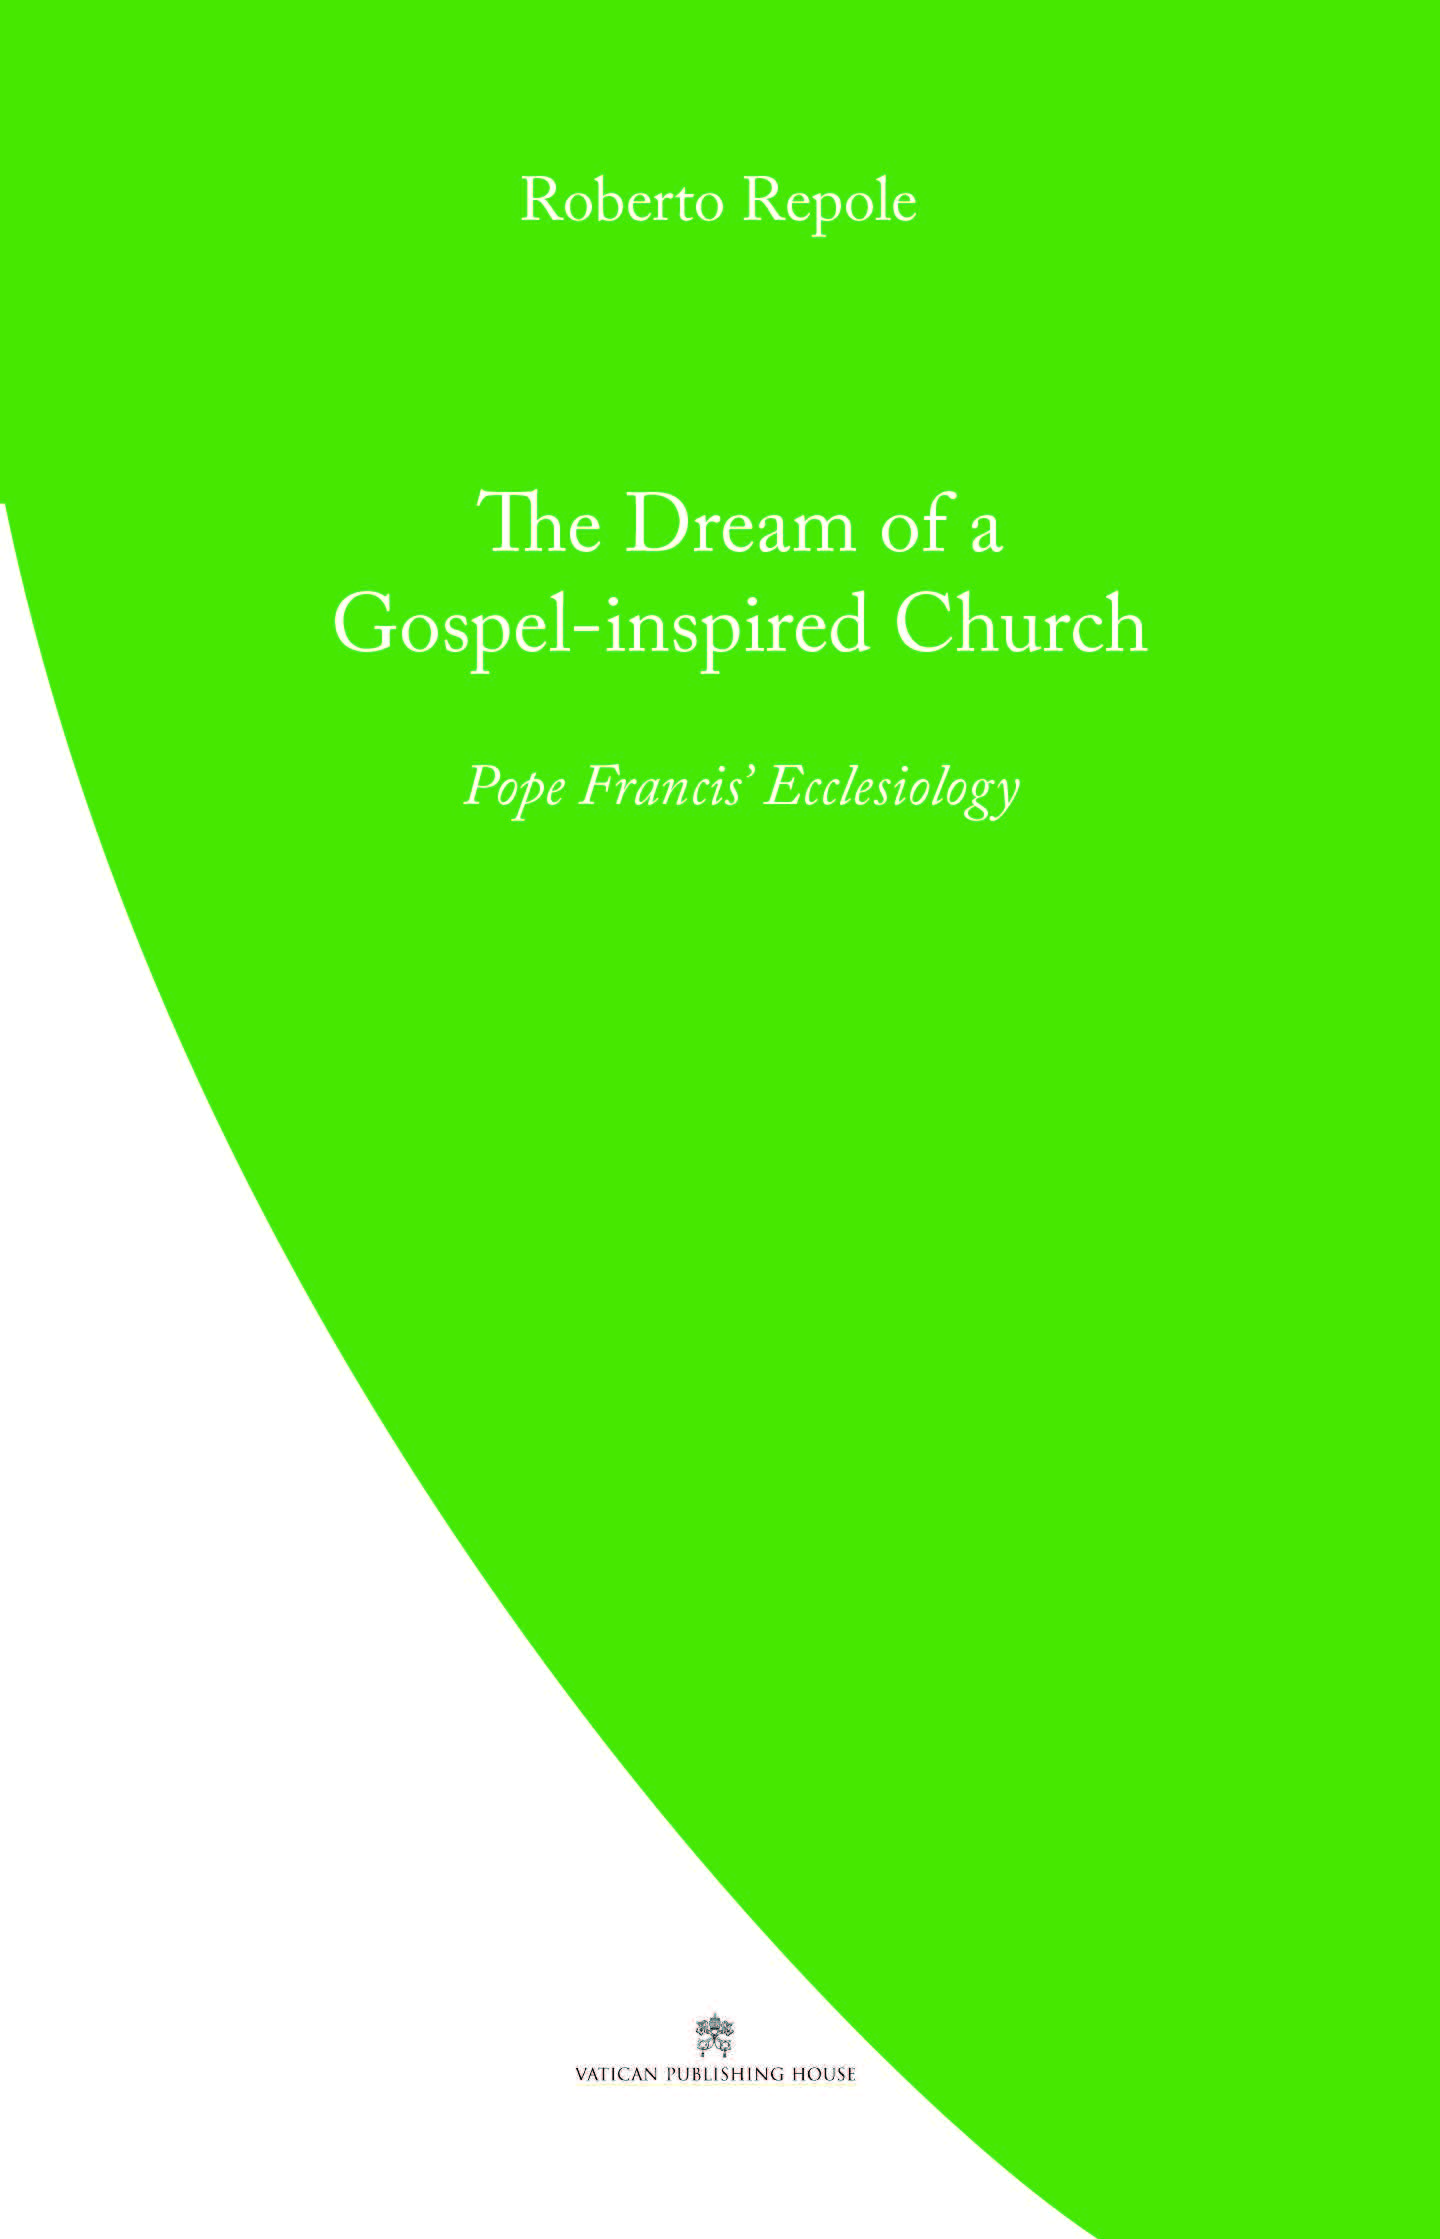 The Dream of a Gospel Inspired Church  Pope Francis' Ecclesiology / Roberto Repole